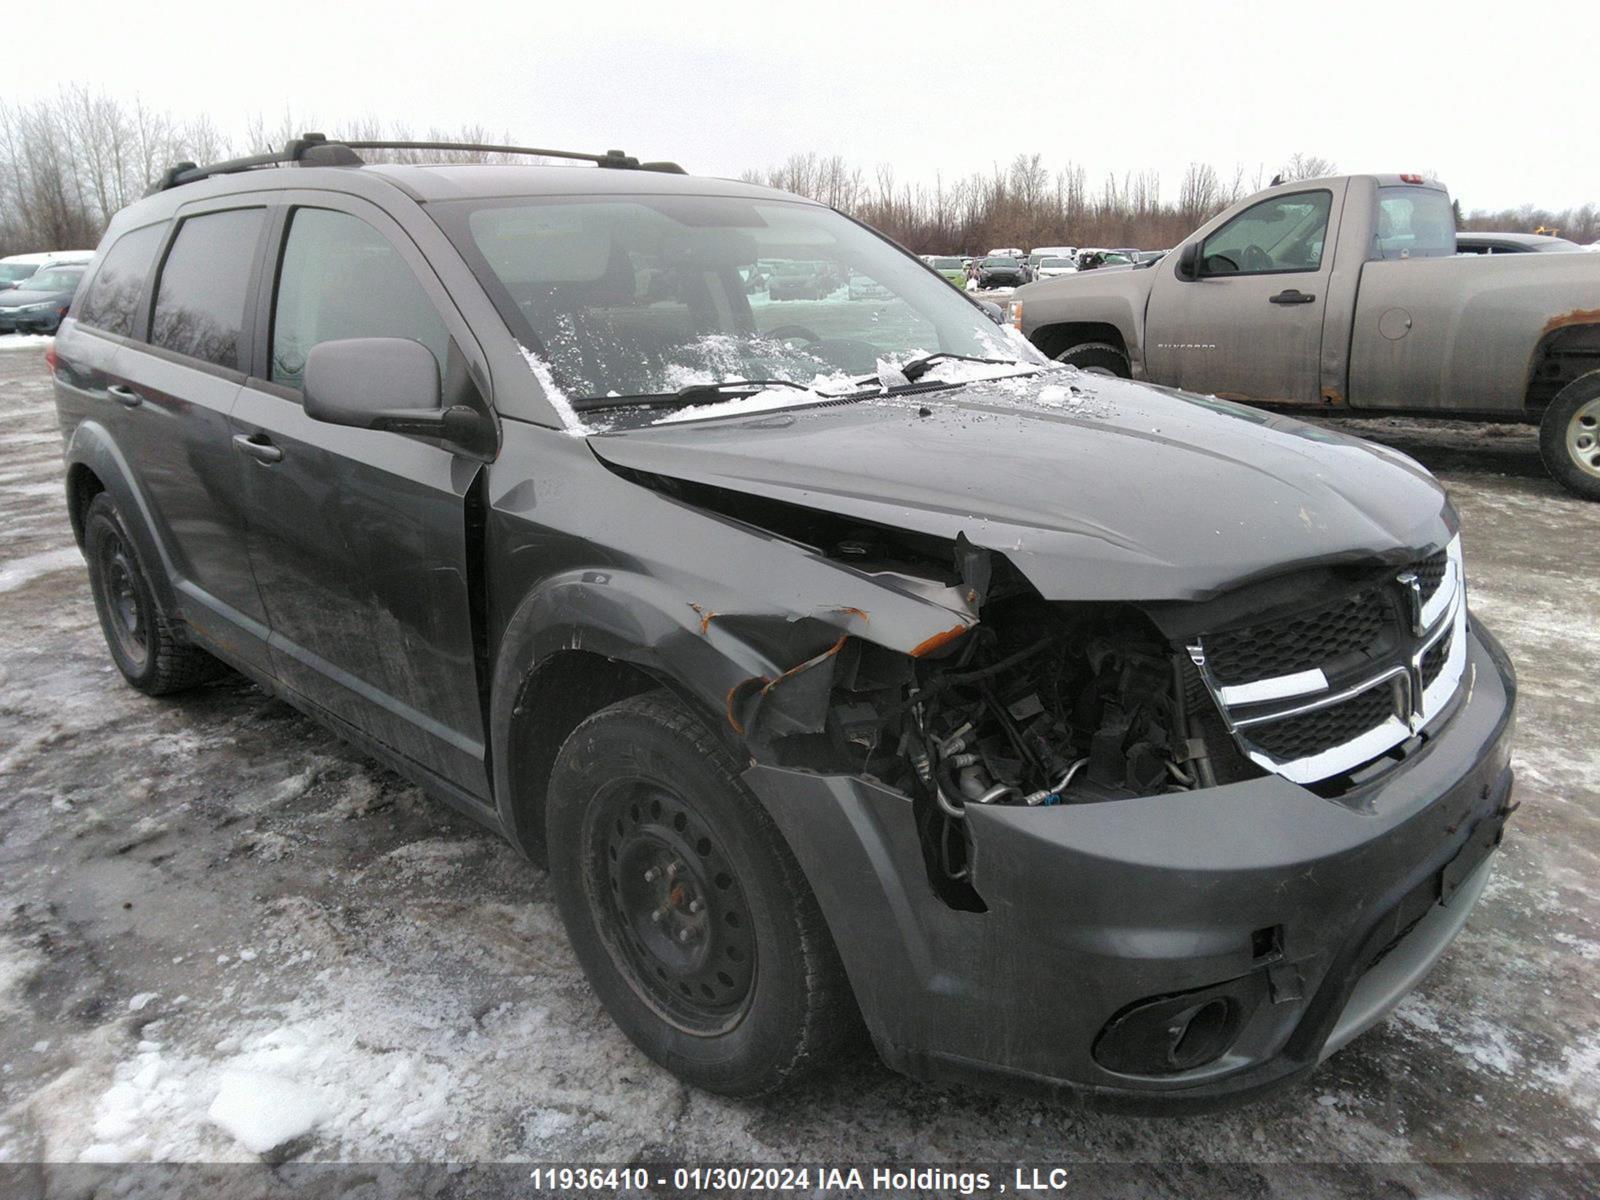 vin: 3C4PDCCG7CT292900 3C4PDCCG7CT292900 2012 dodge journey 3600 for Sale in k0a3h0, 1717 Burton Road , Vars, Ontario, USA